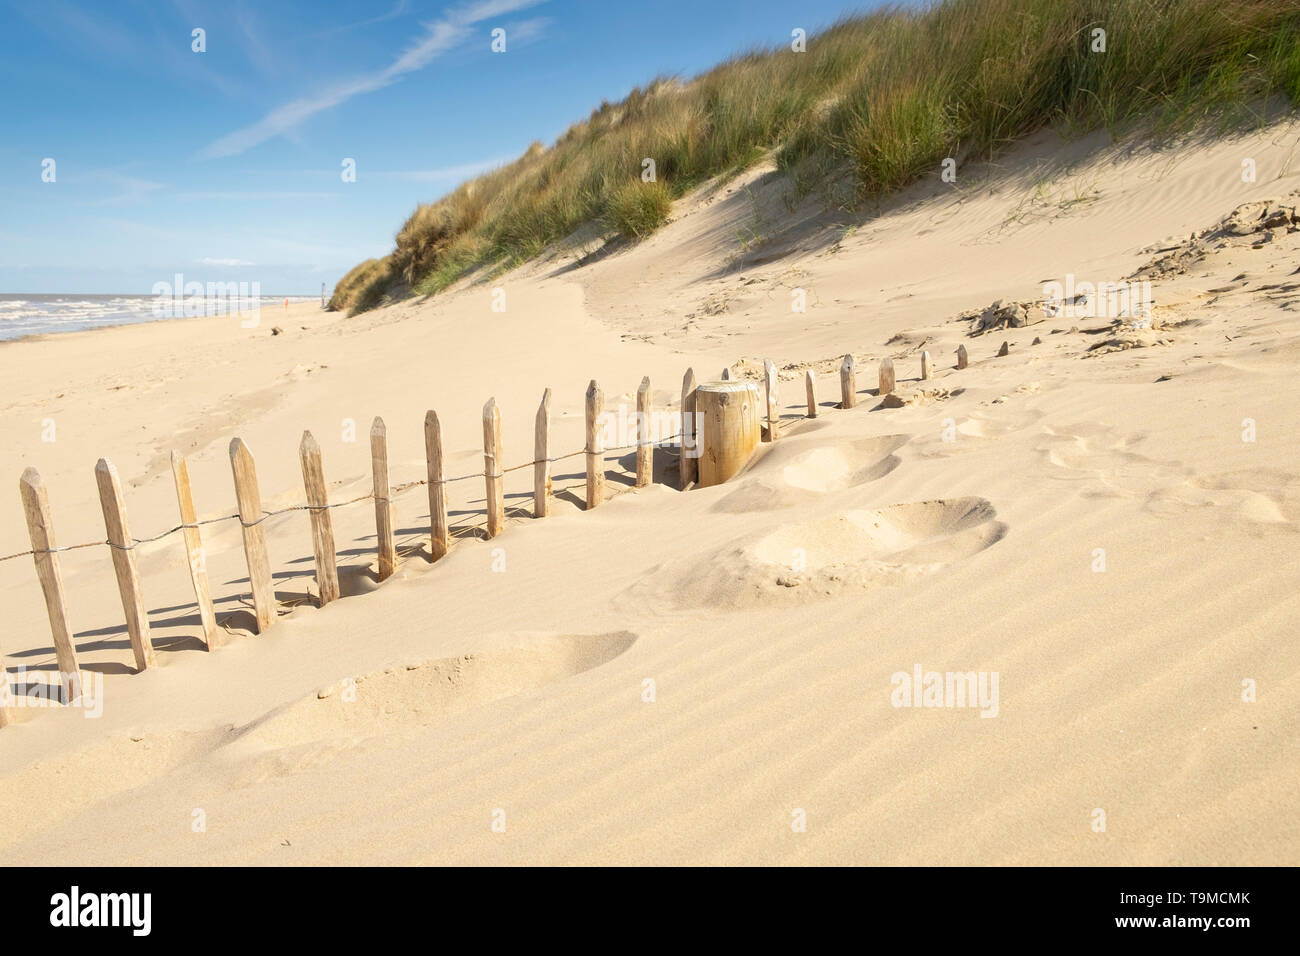 Fence buried by wind blown sand on the beach at Formby, Merseyside, England,UK Stock Photo